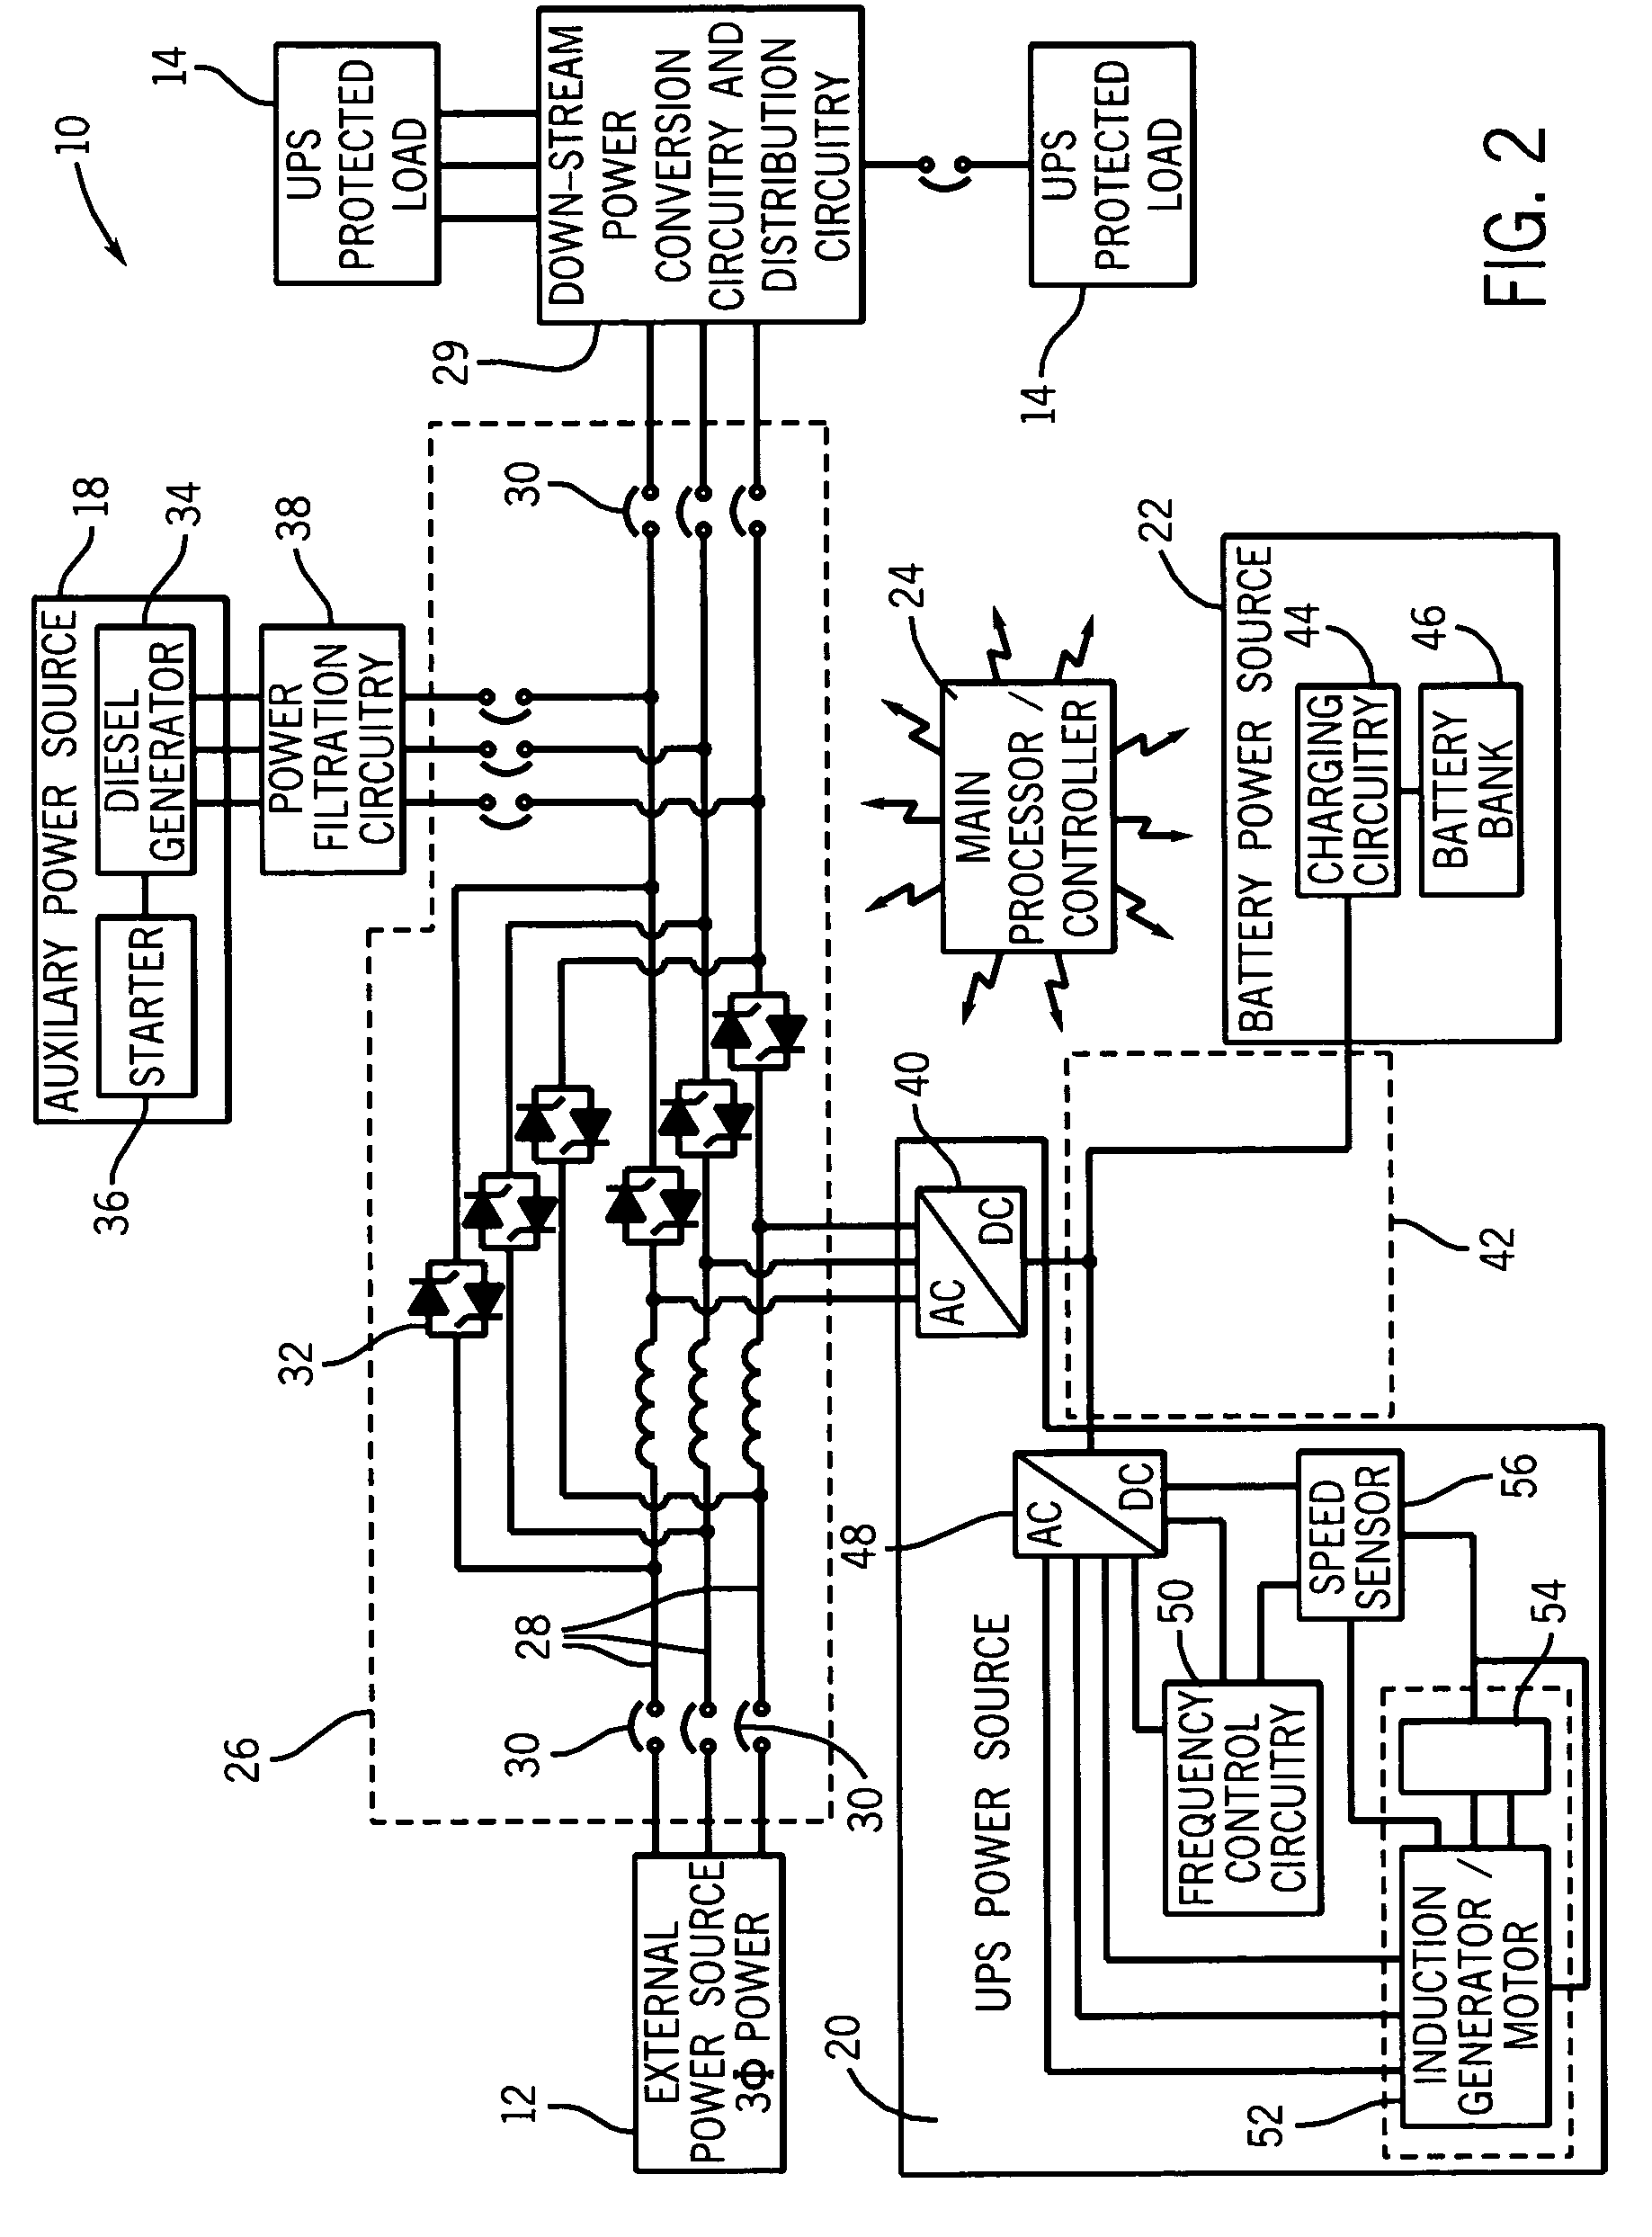 Apparatus and method for transient and uninterruptible power